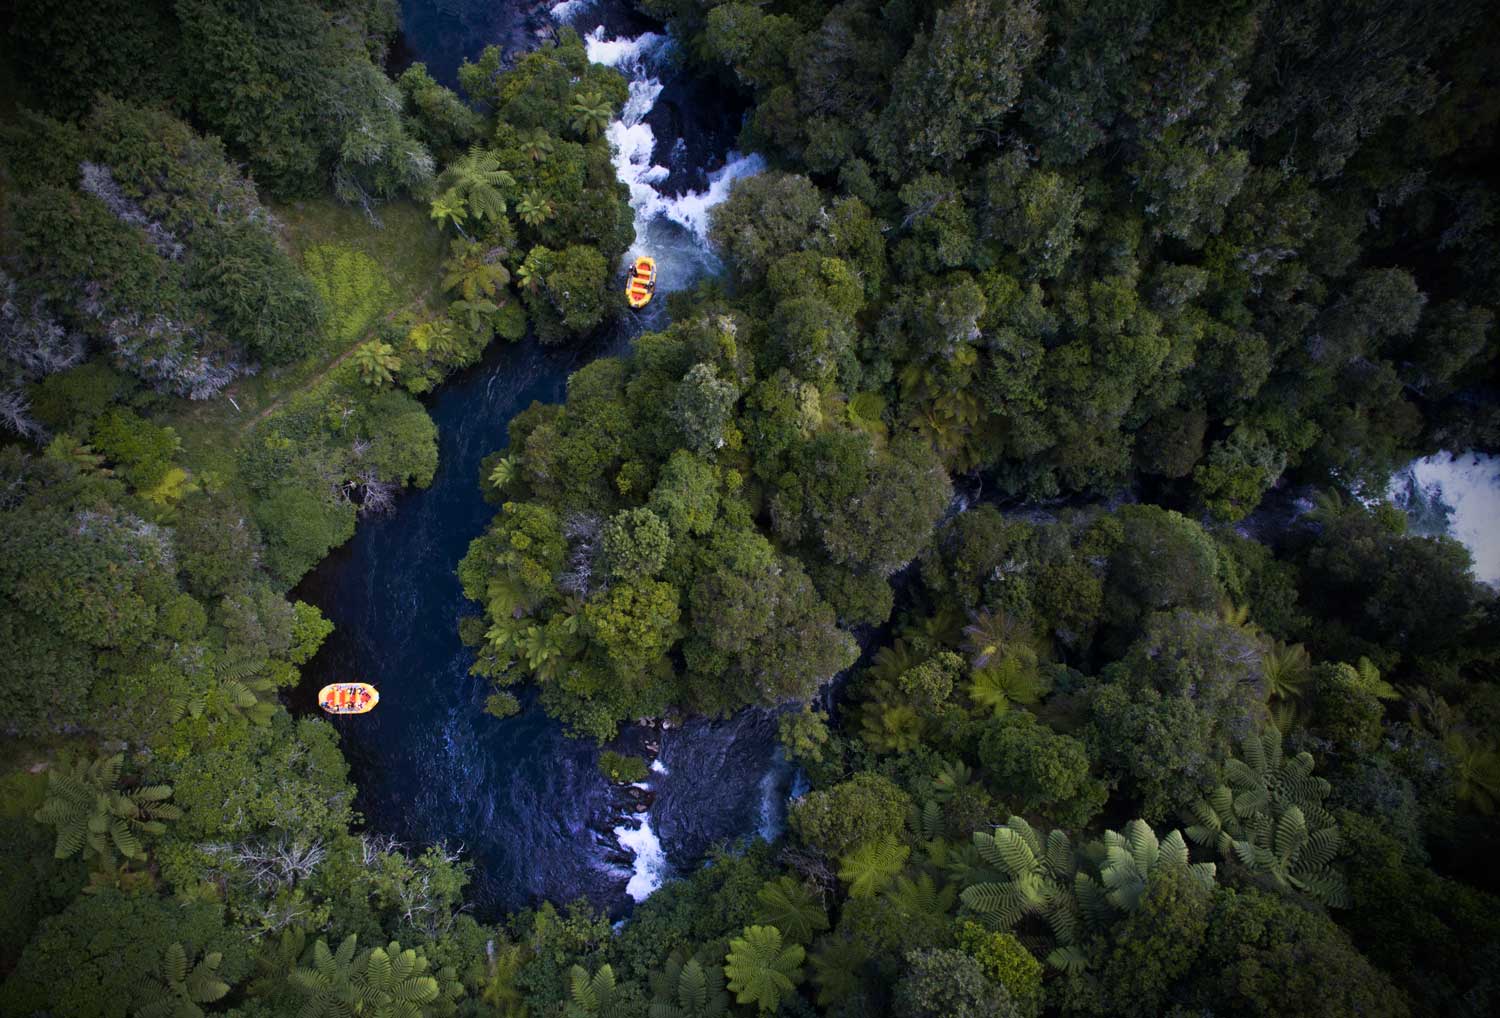 Rafts on the upper section of the Kaituna River.